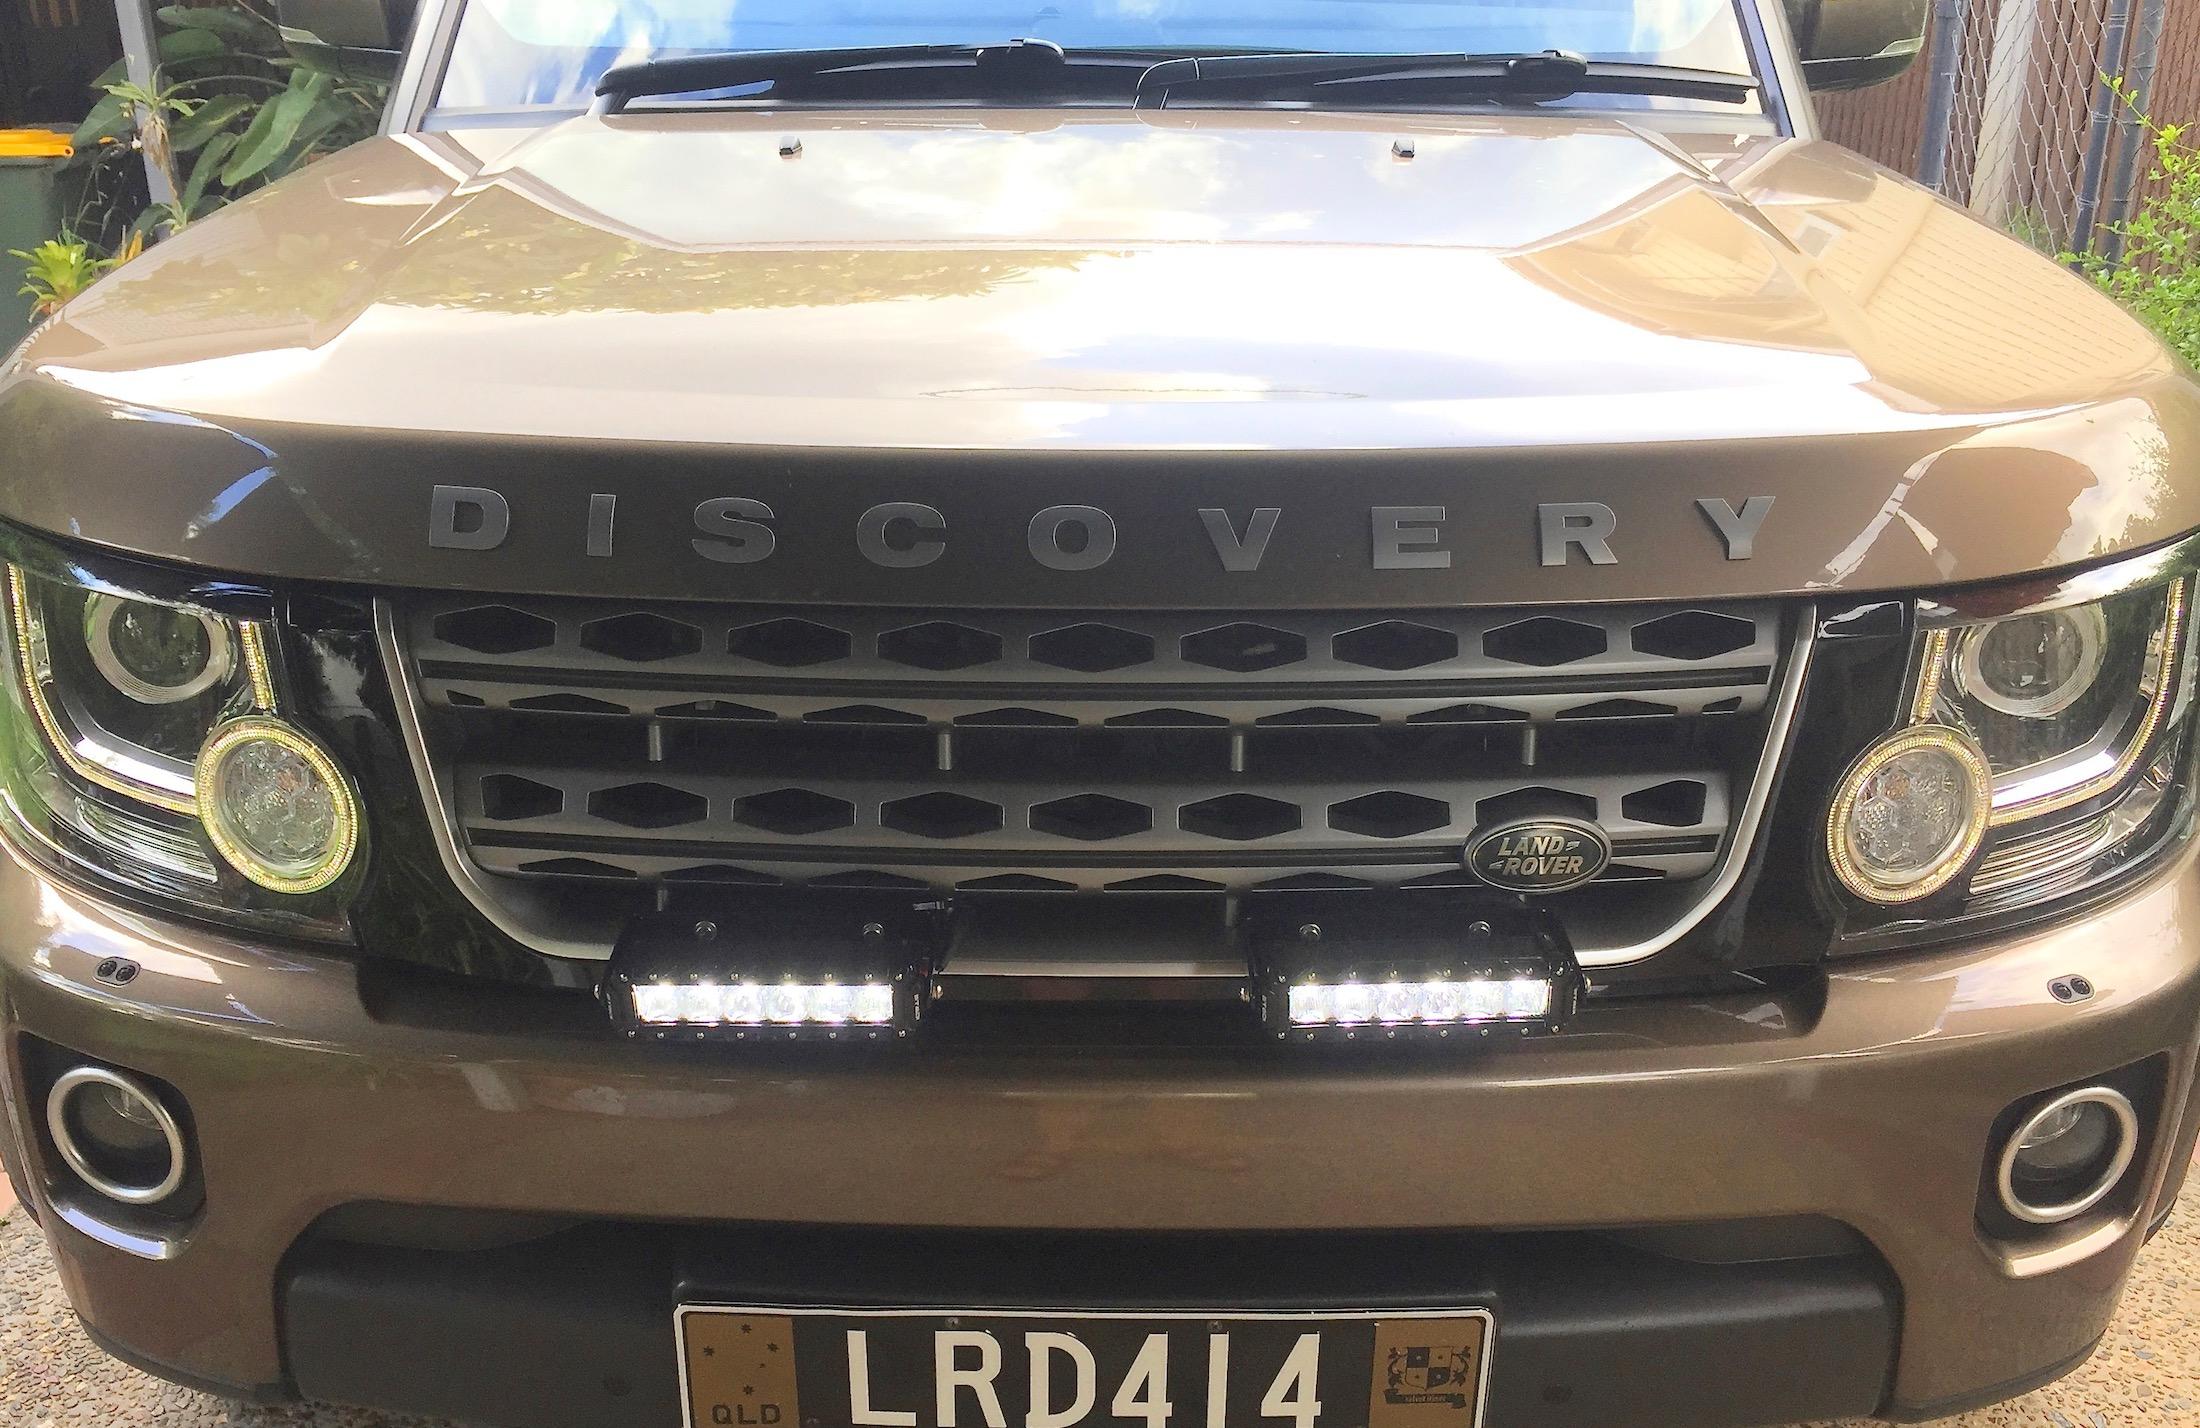 Australian Land Rover Owners